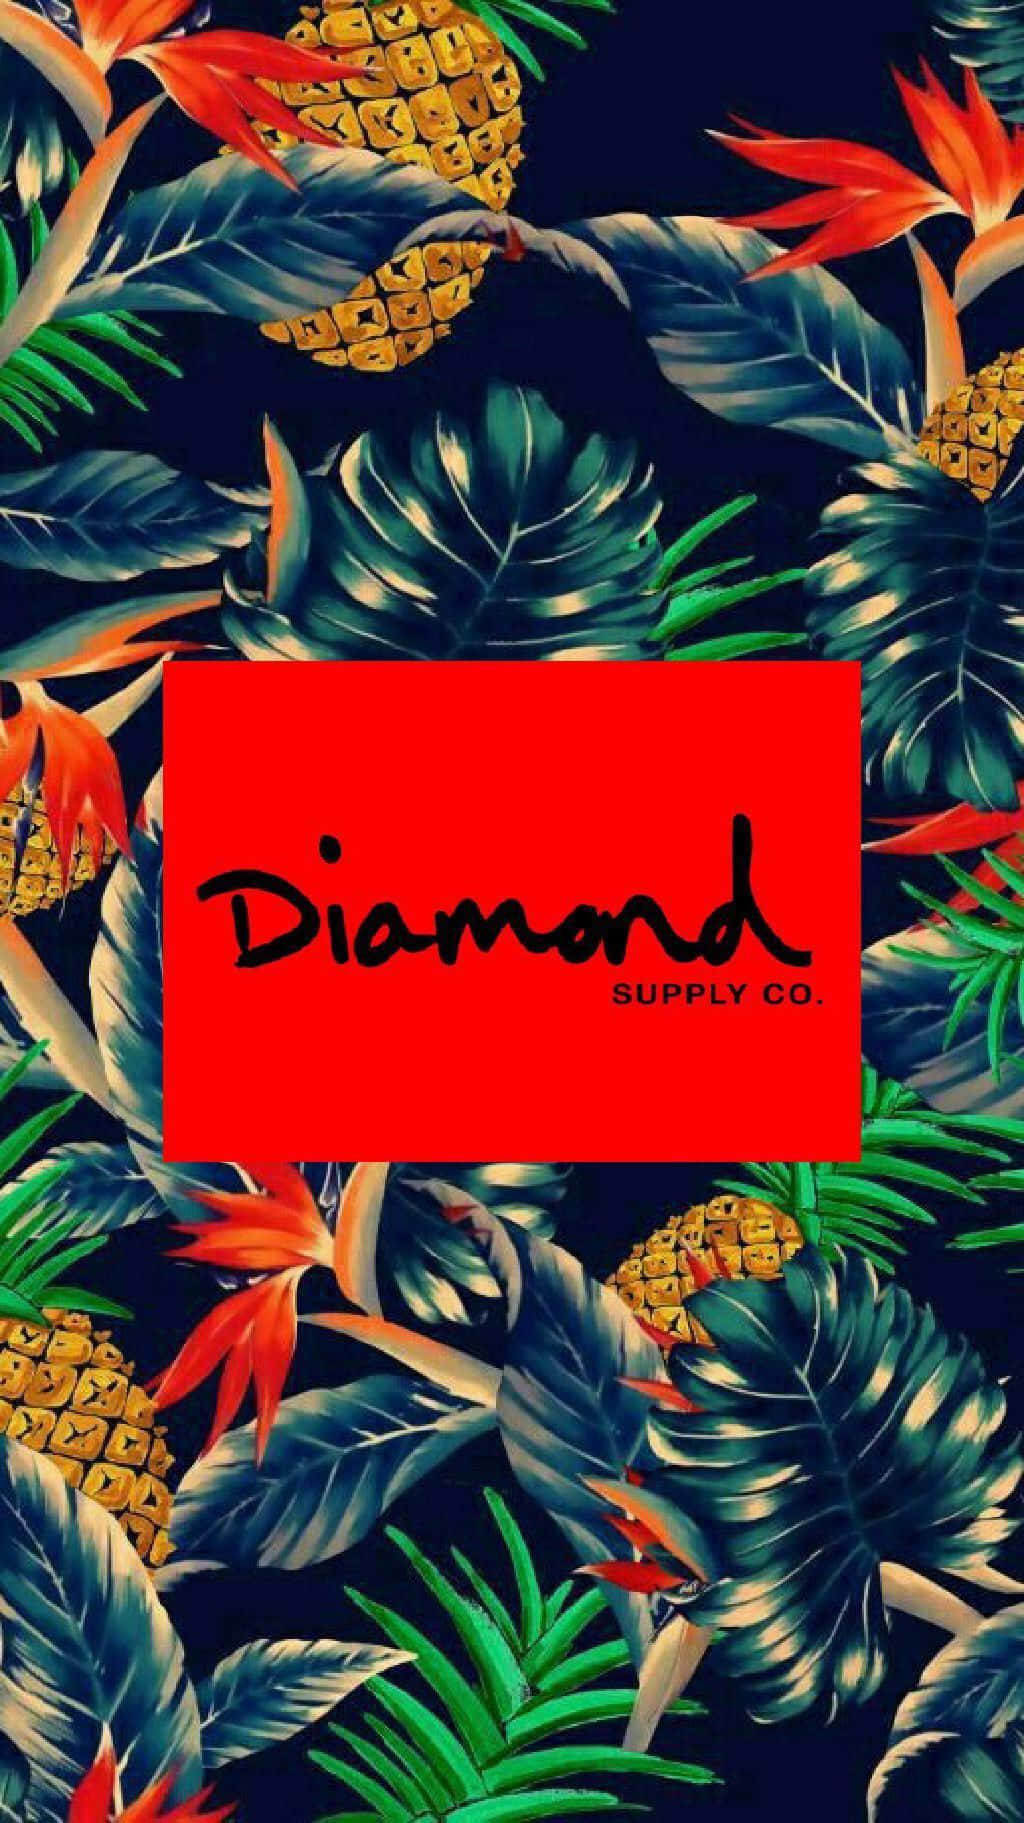 The Classic Diamond Supply Co. Logo Against a Grunge-Style Background Wallpaper